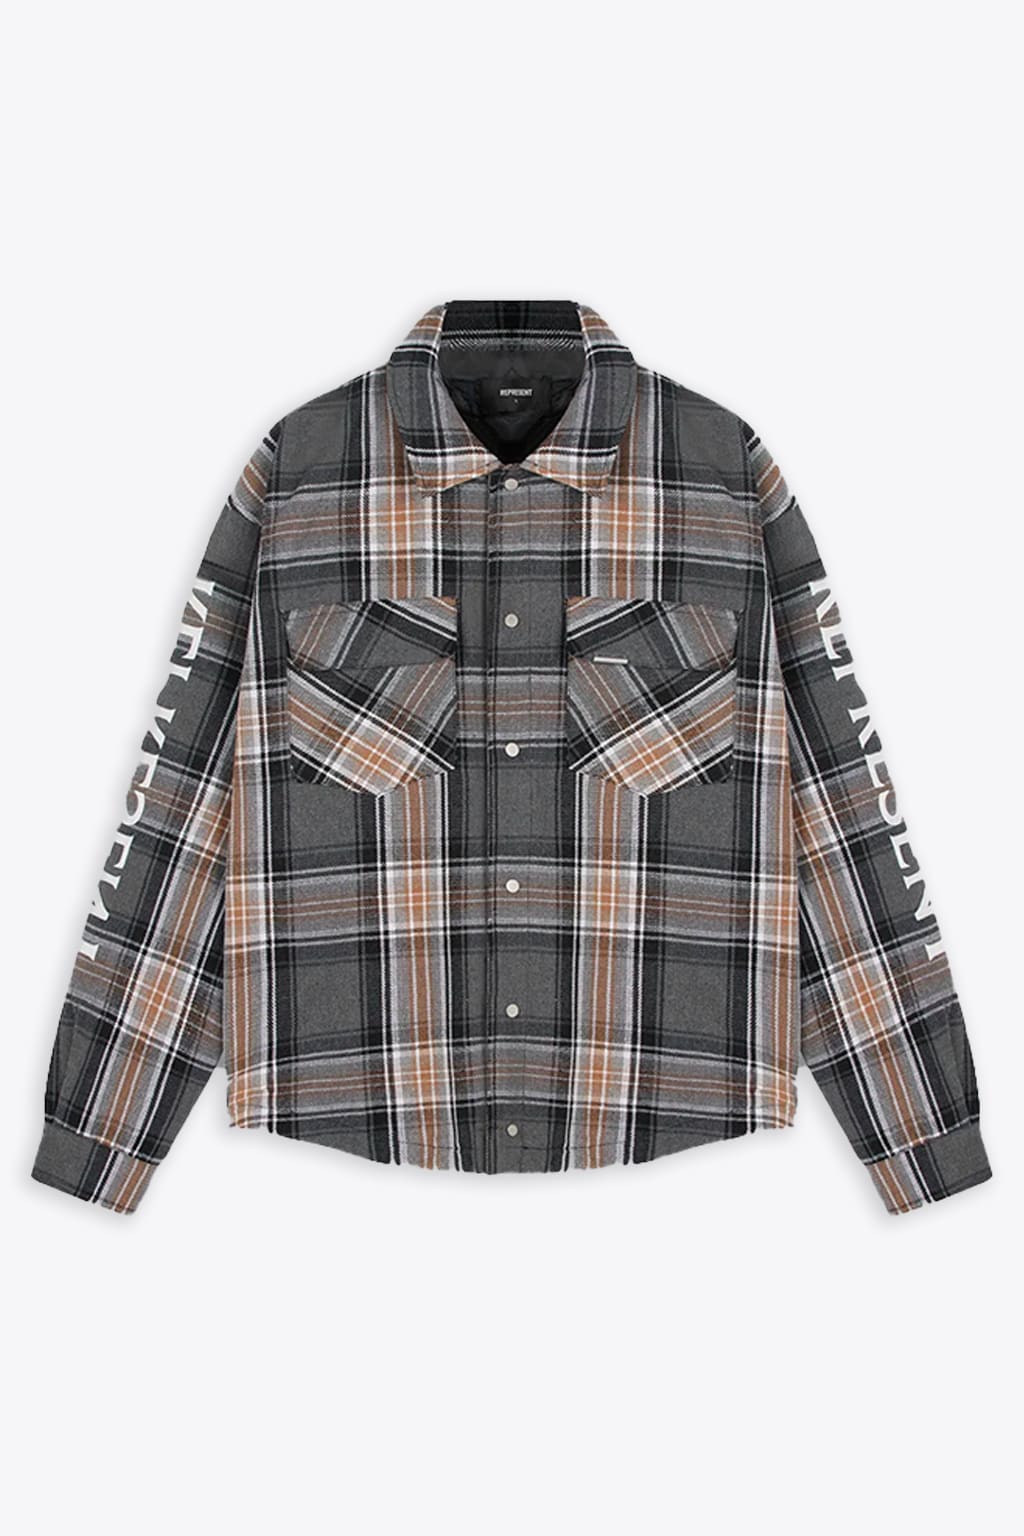 REPRESENT QUILTED FLANNEL SHIRT GREY AND BEIGE CHECK FLANNEL SHIRT - QUILTED FLANNEL SHIRT